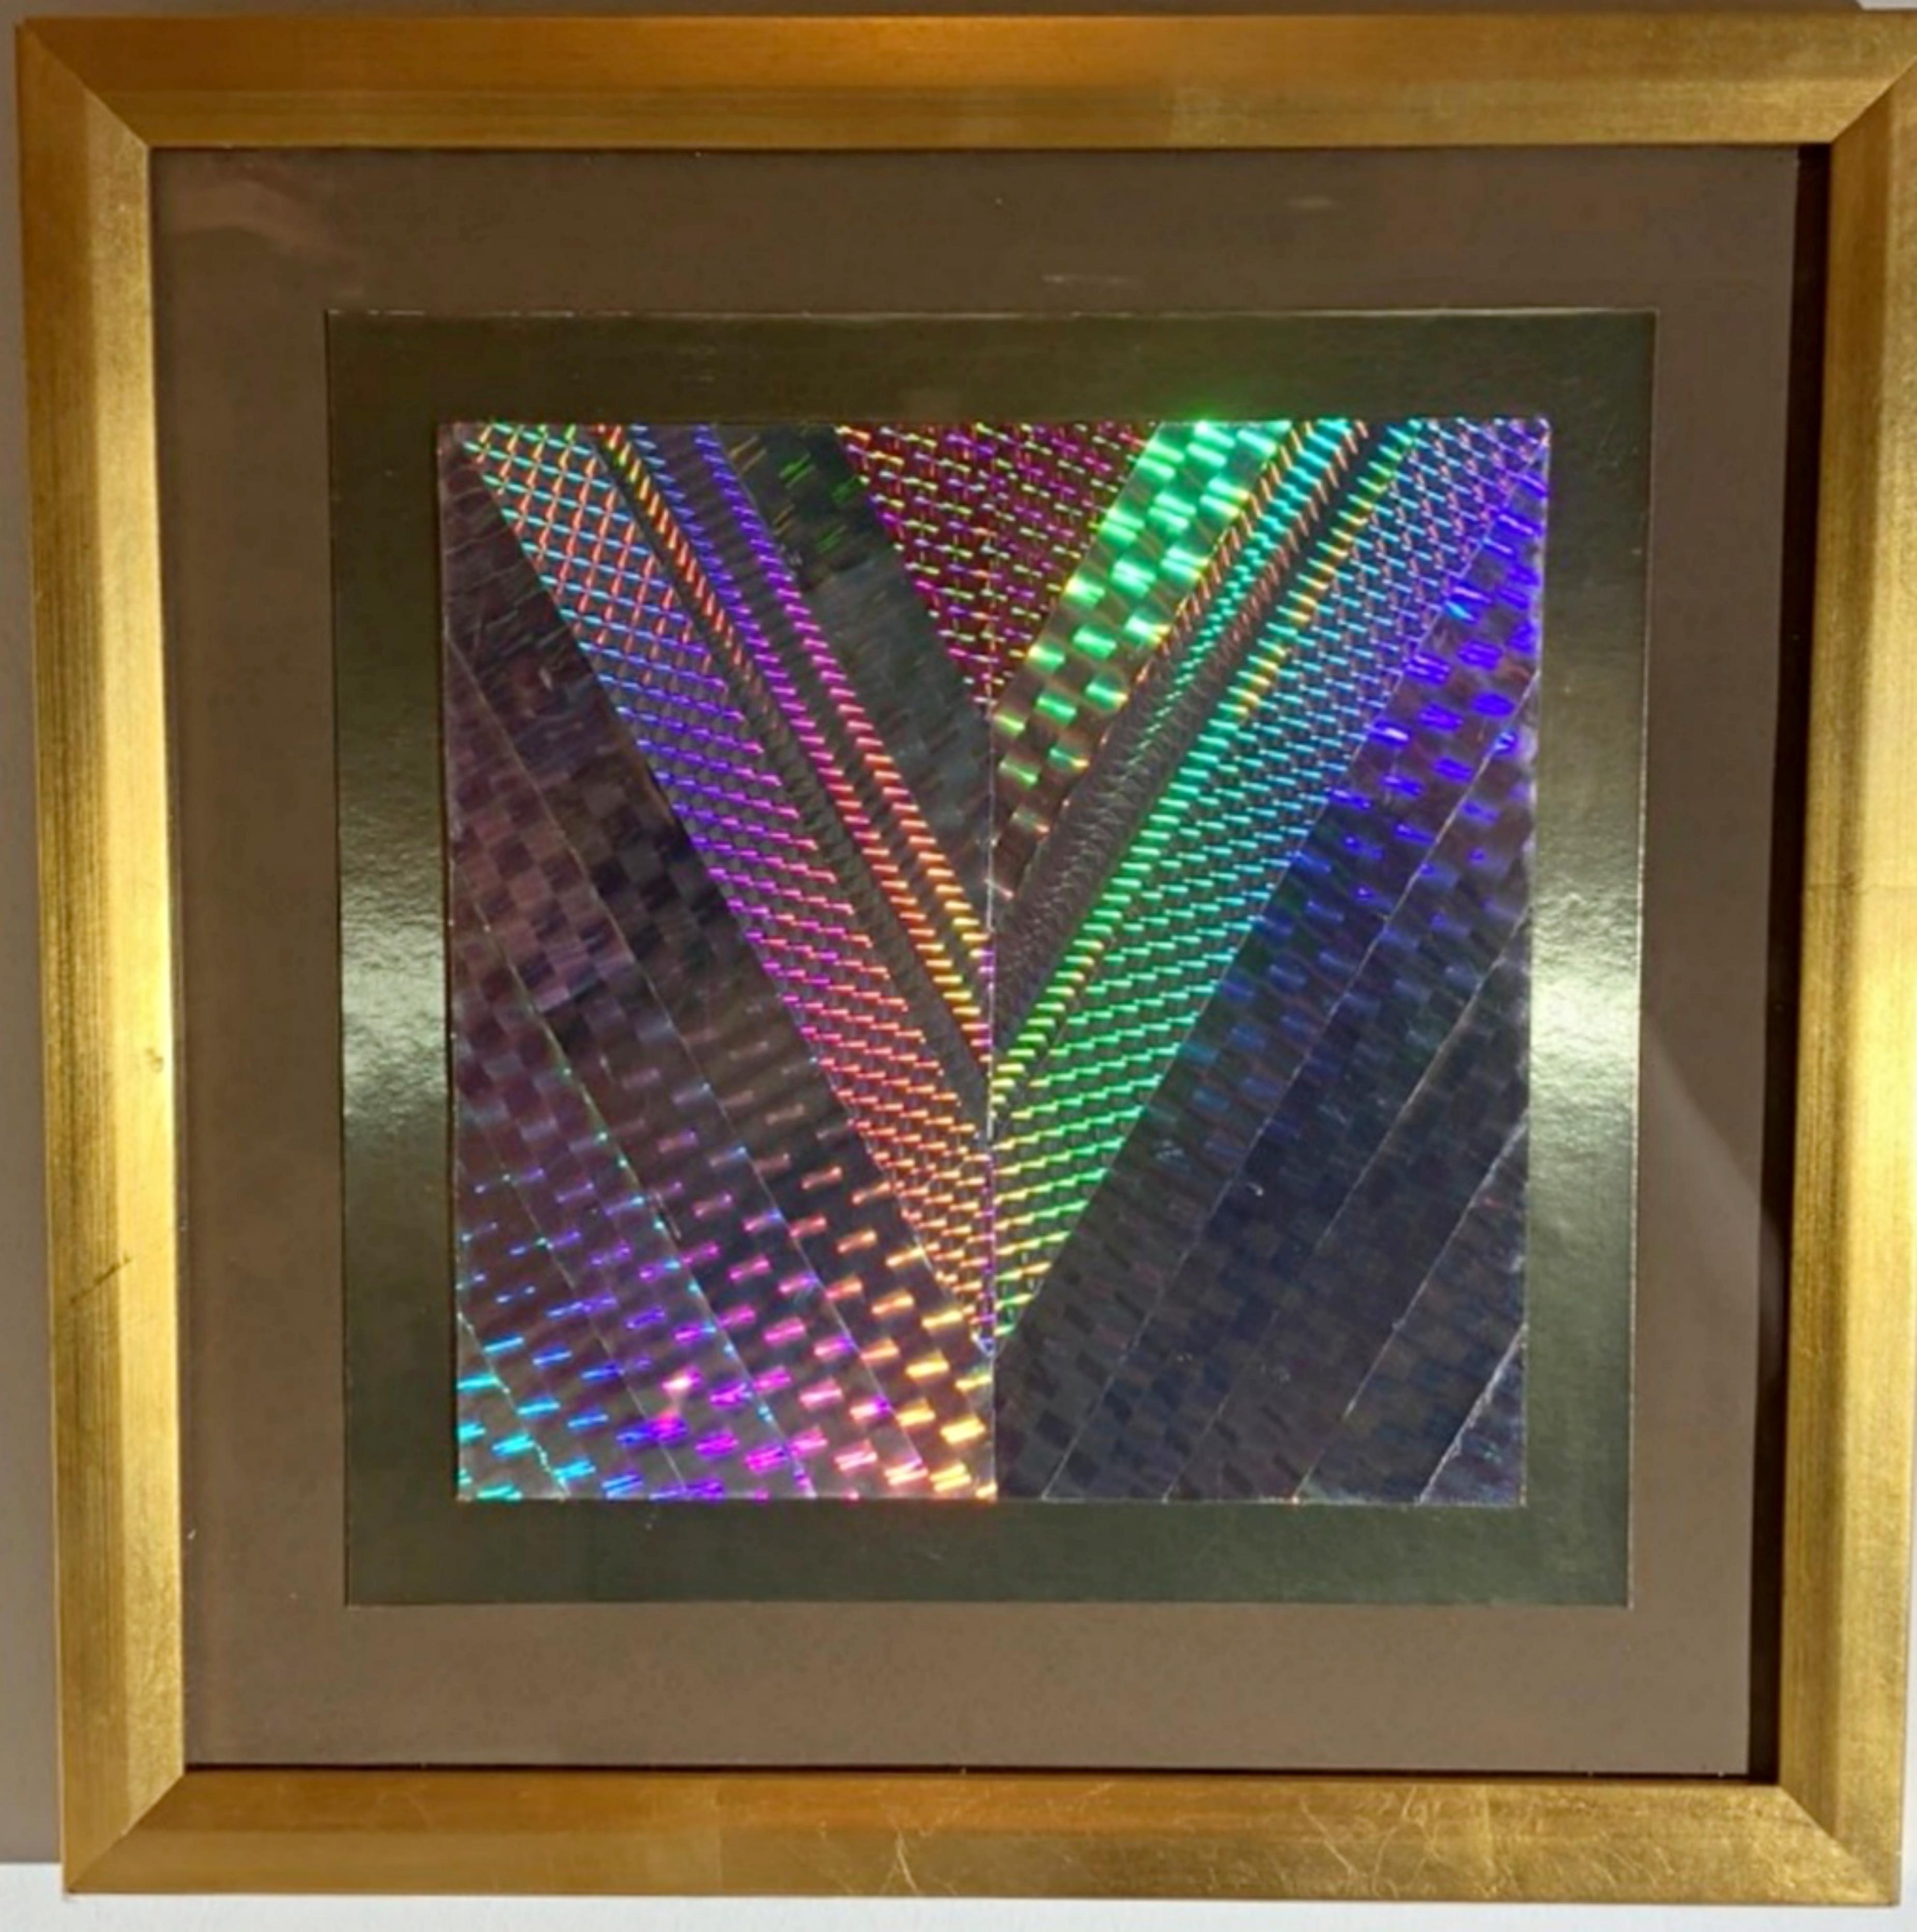 Untitled Chevron Collage, de-accessioned from the Honolulu Museum of Art  - Abstract Geometric Mixed Media Art by Kenneth Noland